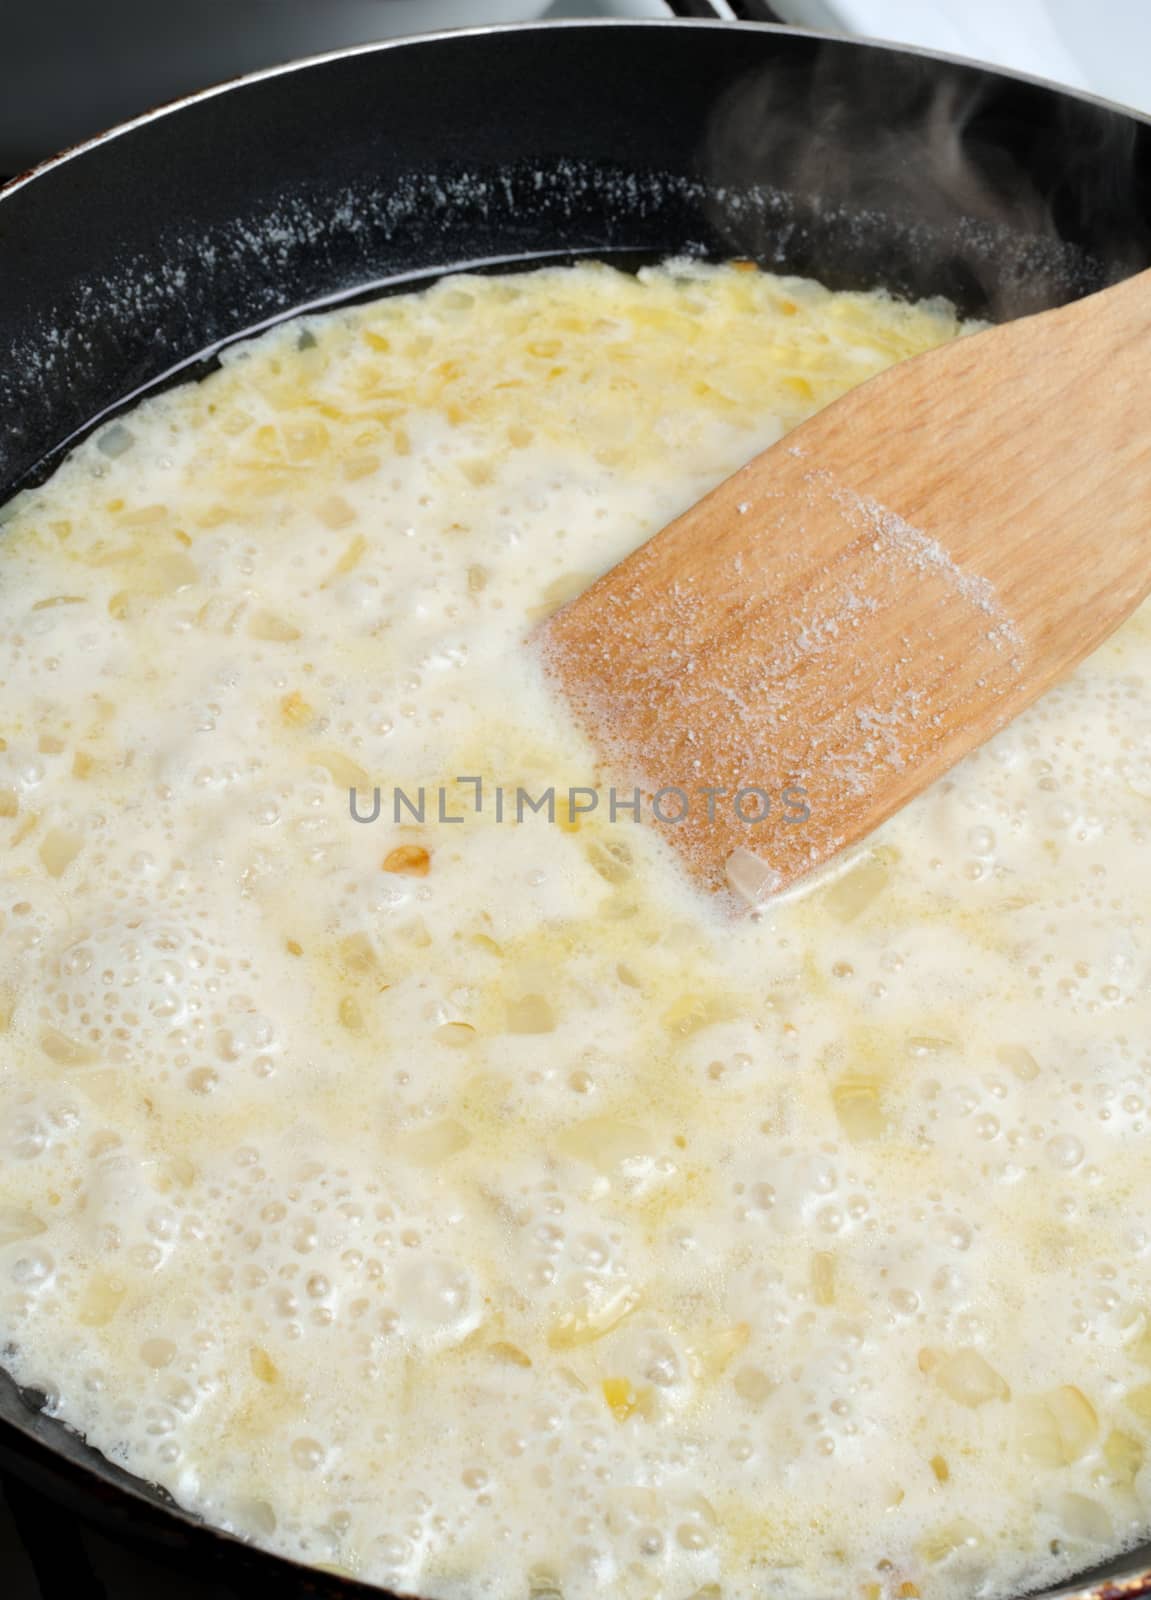  Boiling cream added to the pan to cook the sauce